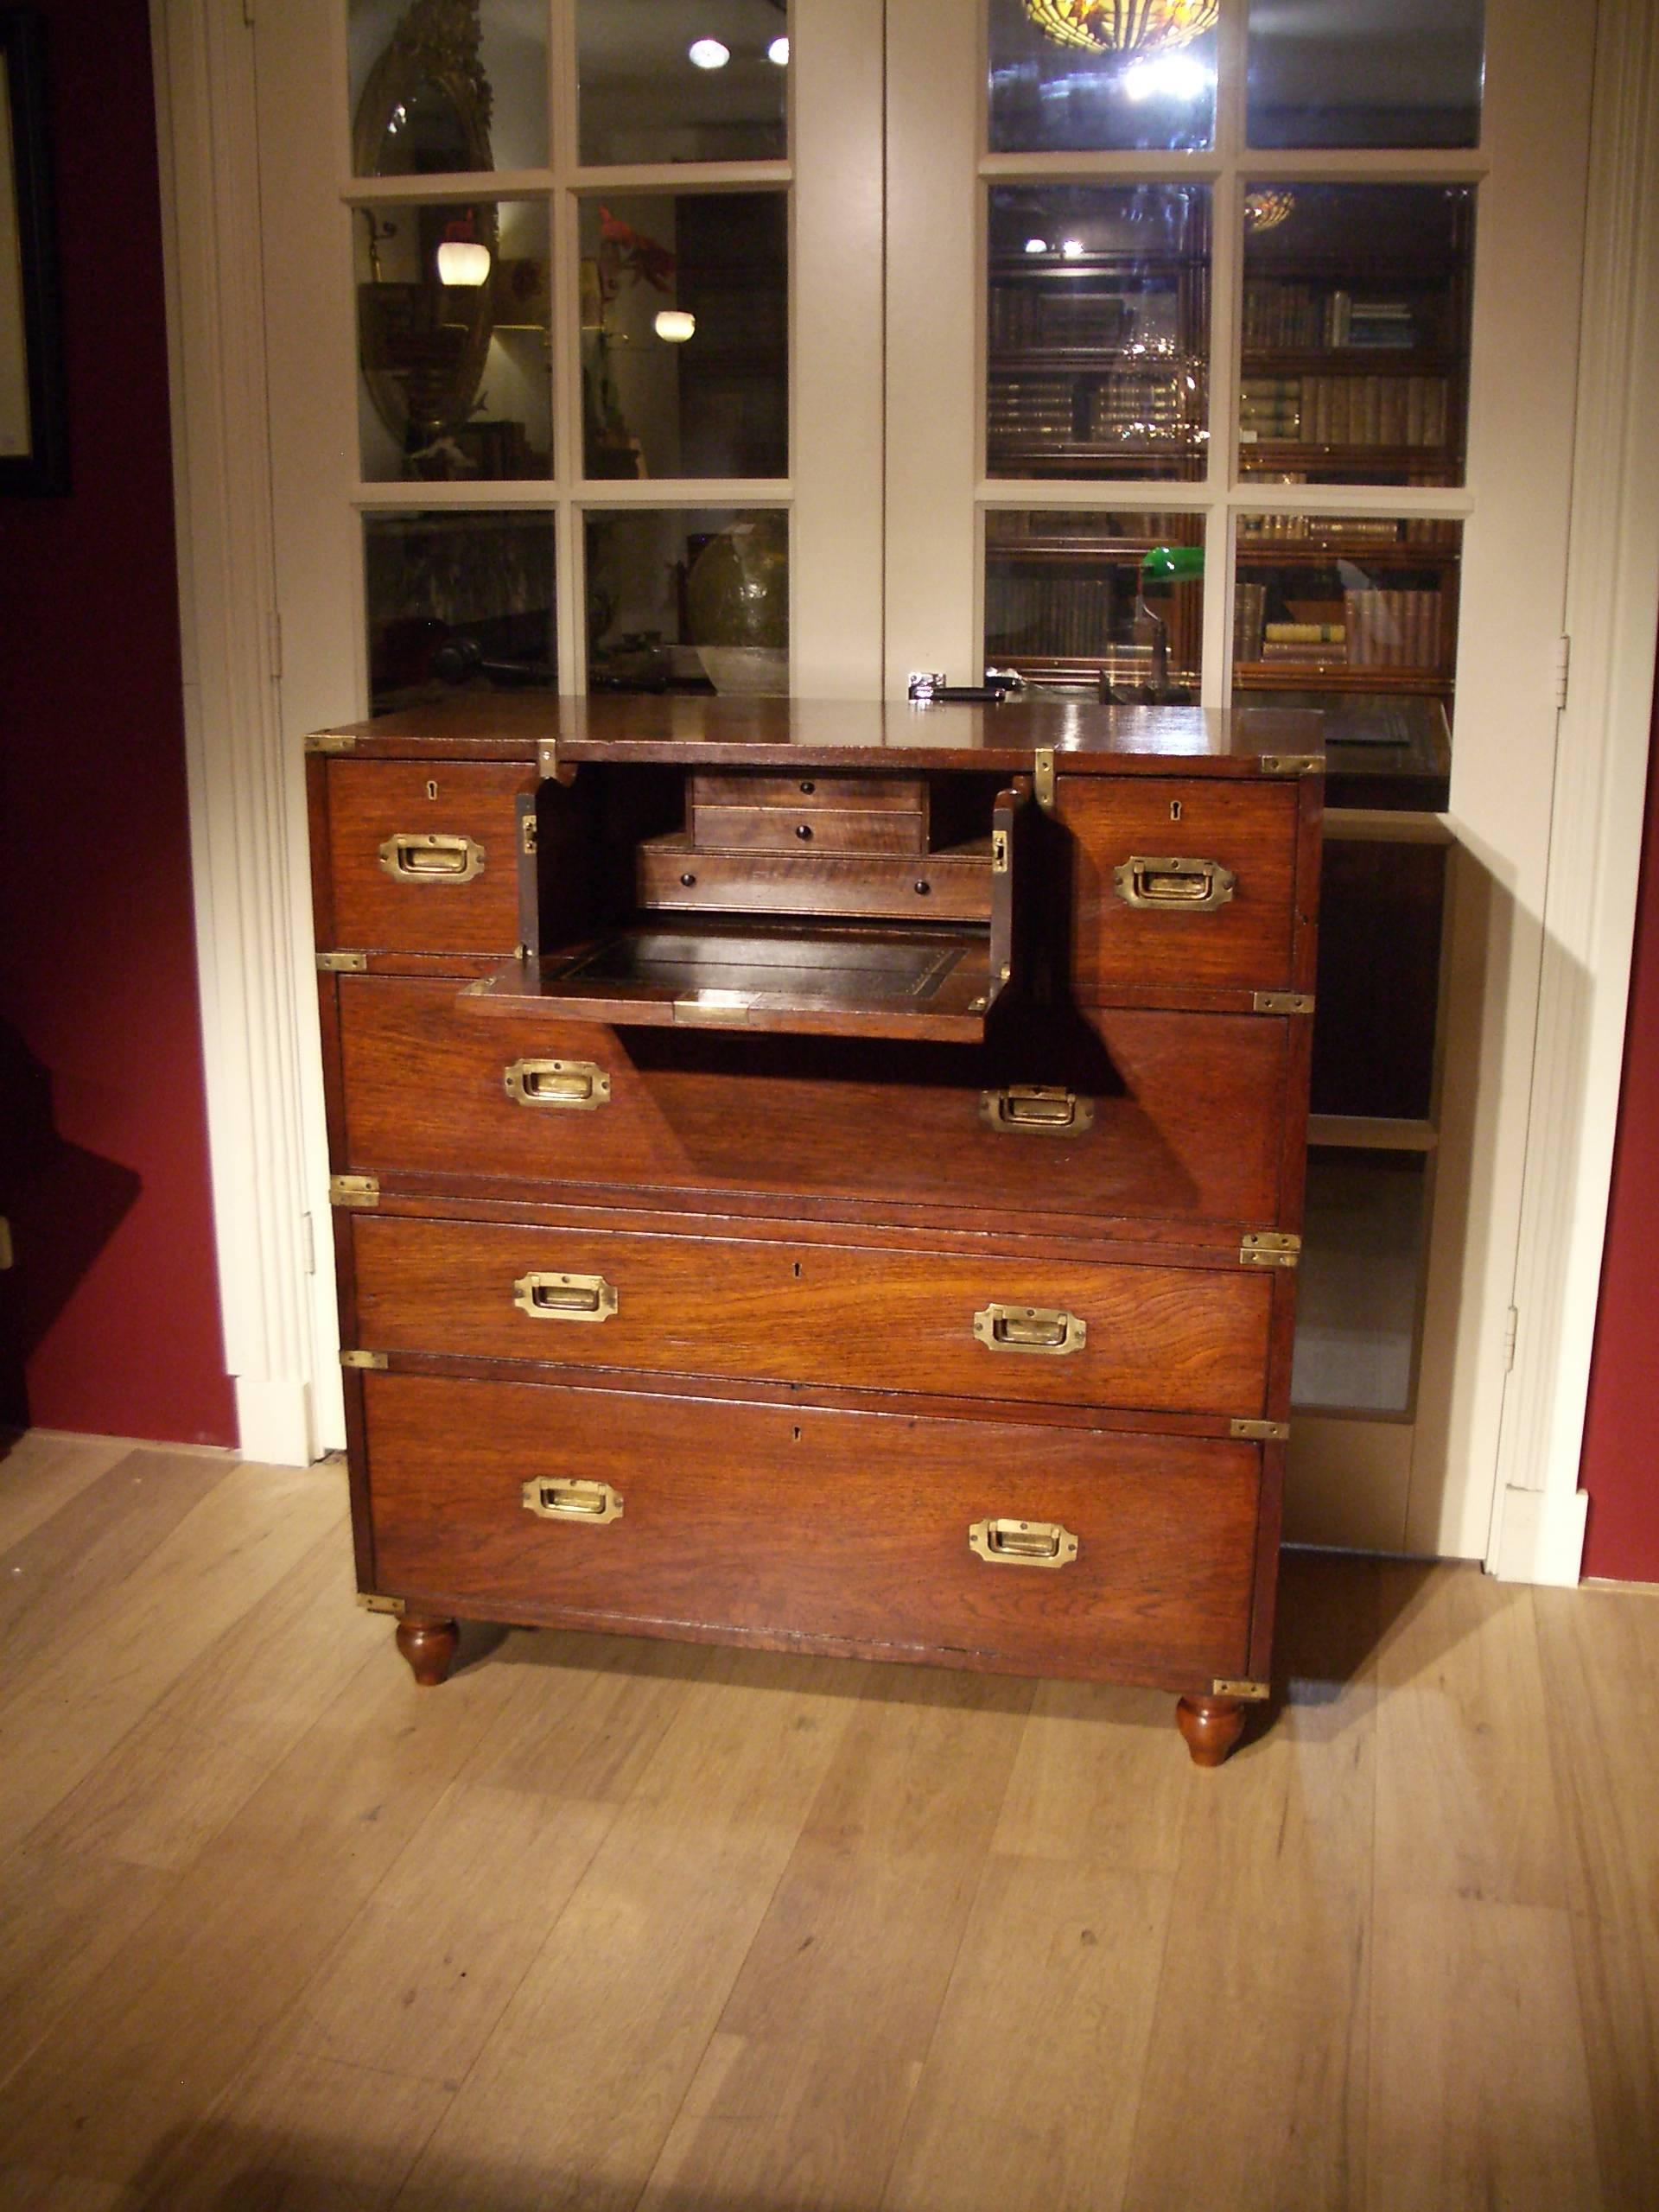 Victorian teak secretaire military chest
Here we have a fine military chest with a secretaire drawer. The chest is made in two sections for the ease of transportation, either by sea or pack horse and mule.
This particular chest would have been